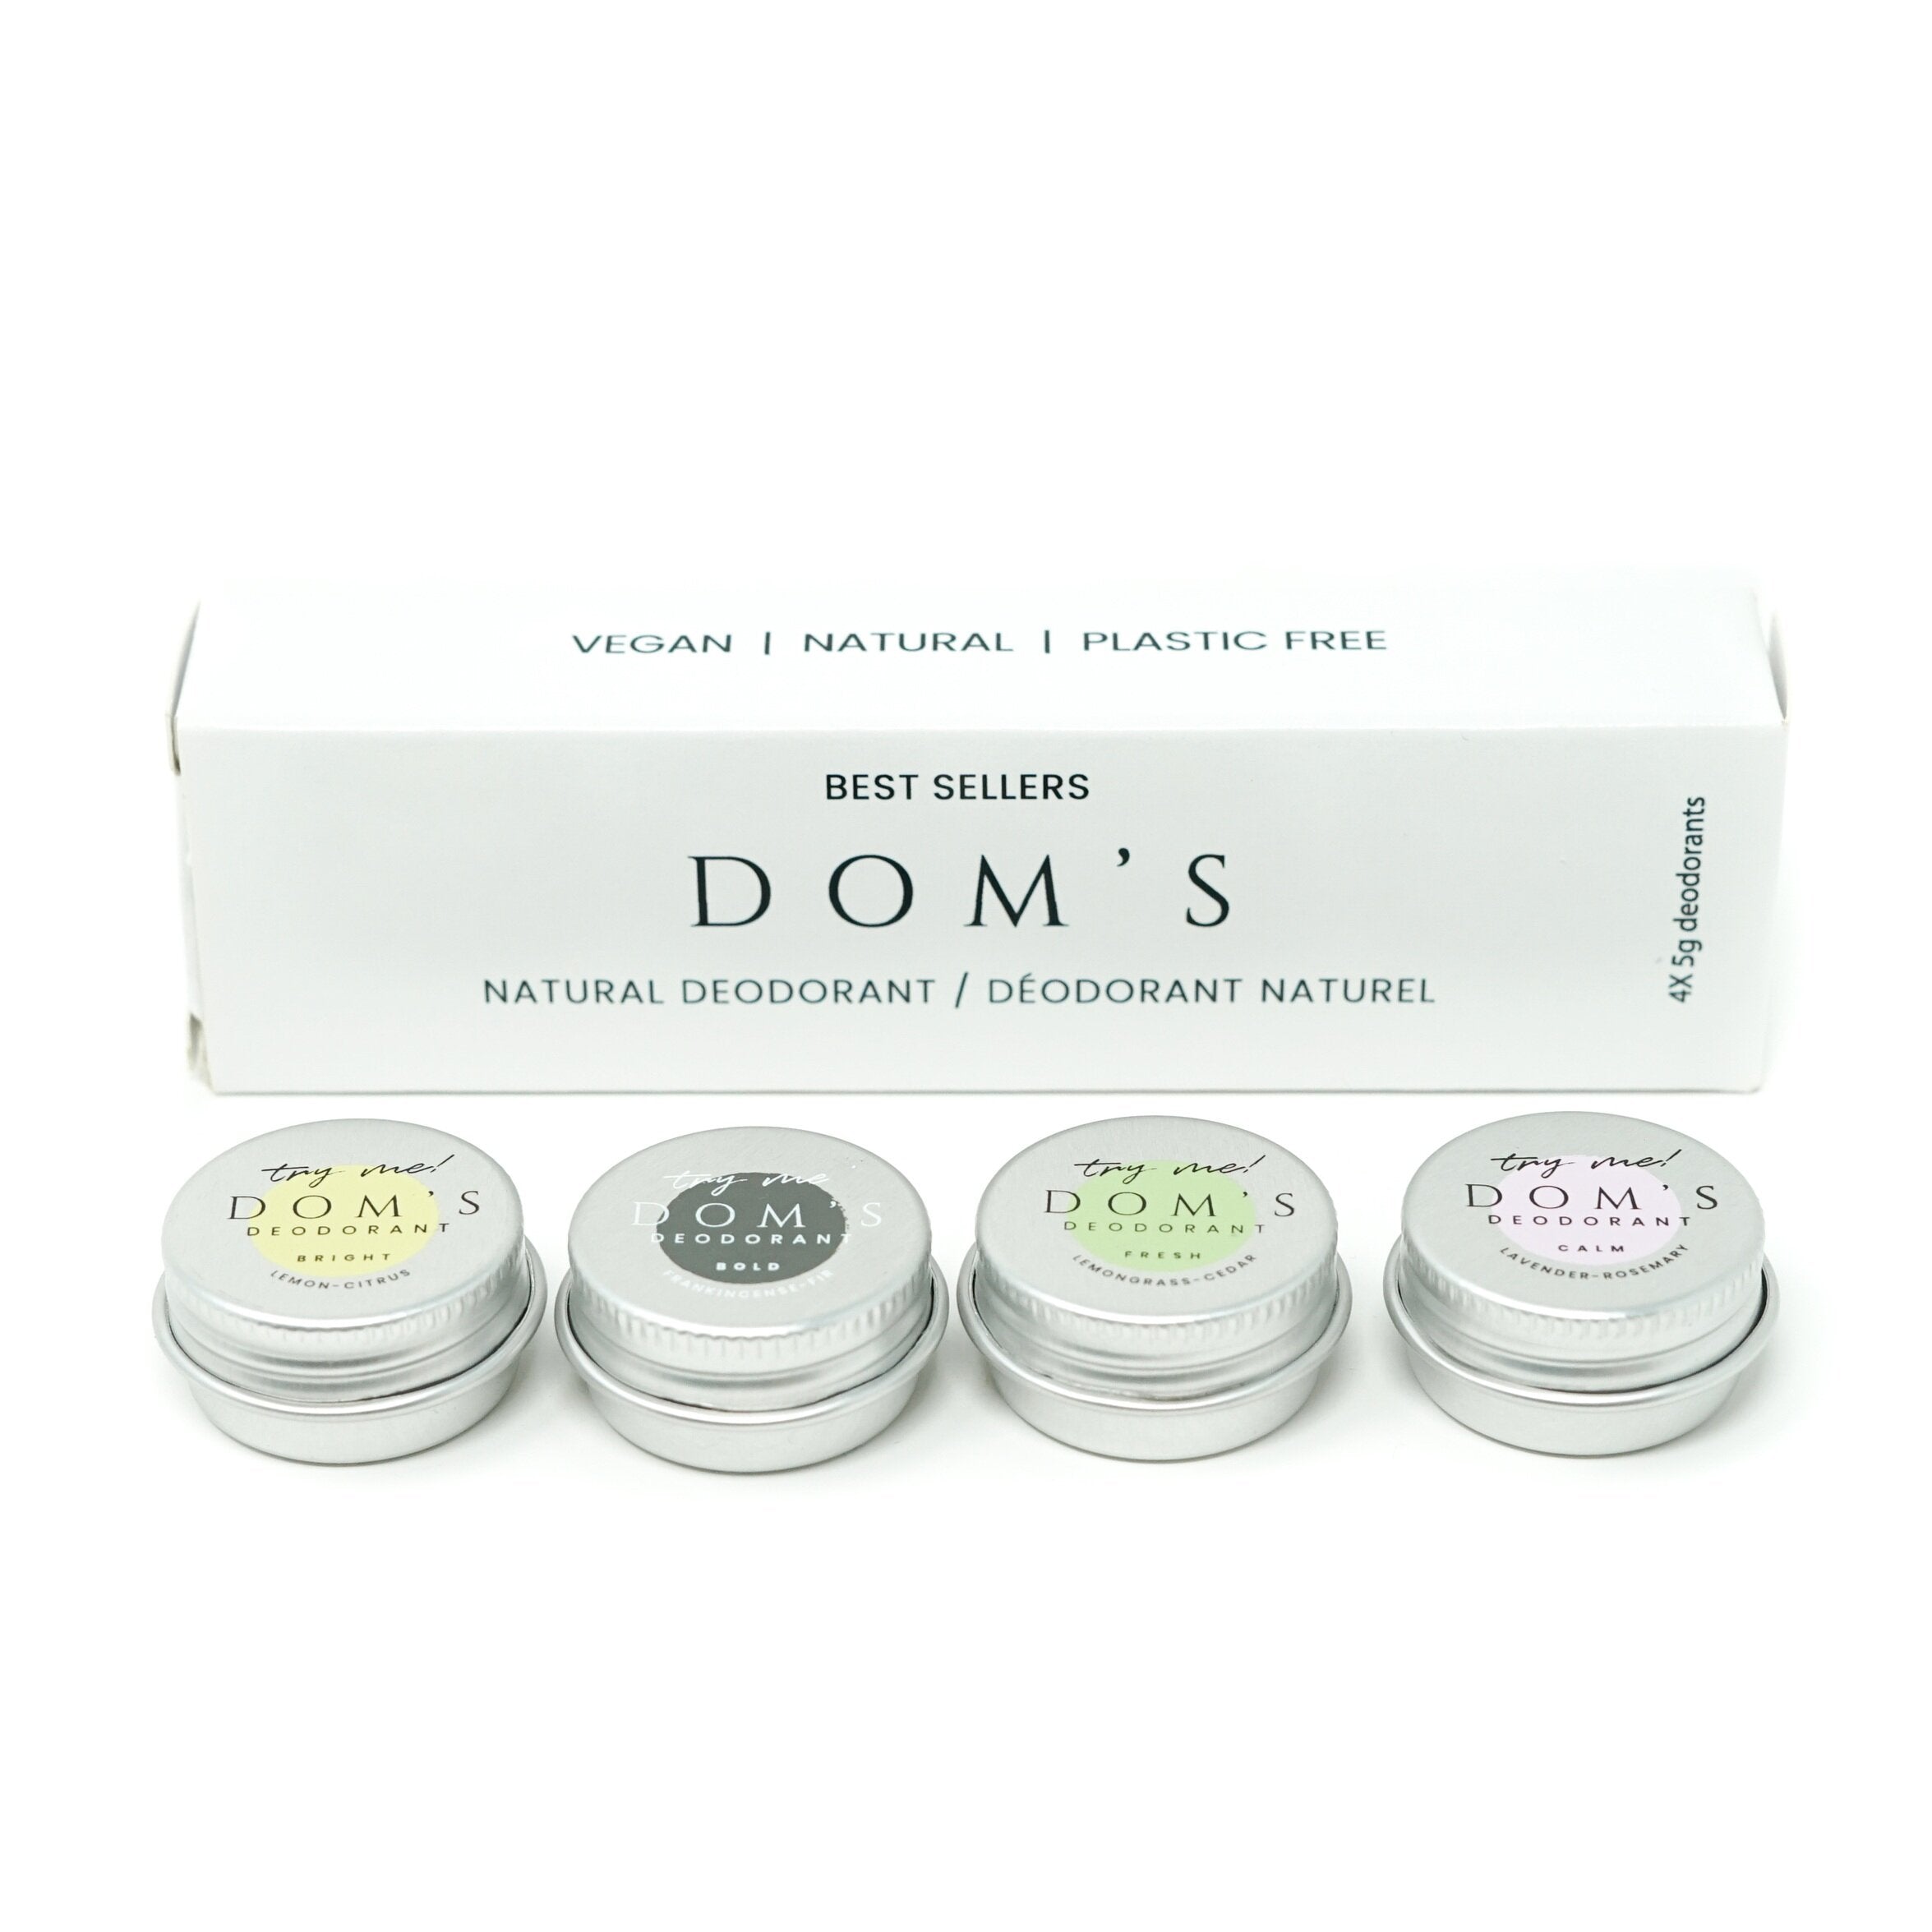 Dom's Deodorant - Find Your Scent Deodorant - nelsonnaturals remineralizing toothpaste